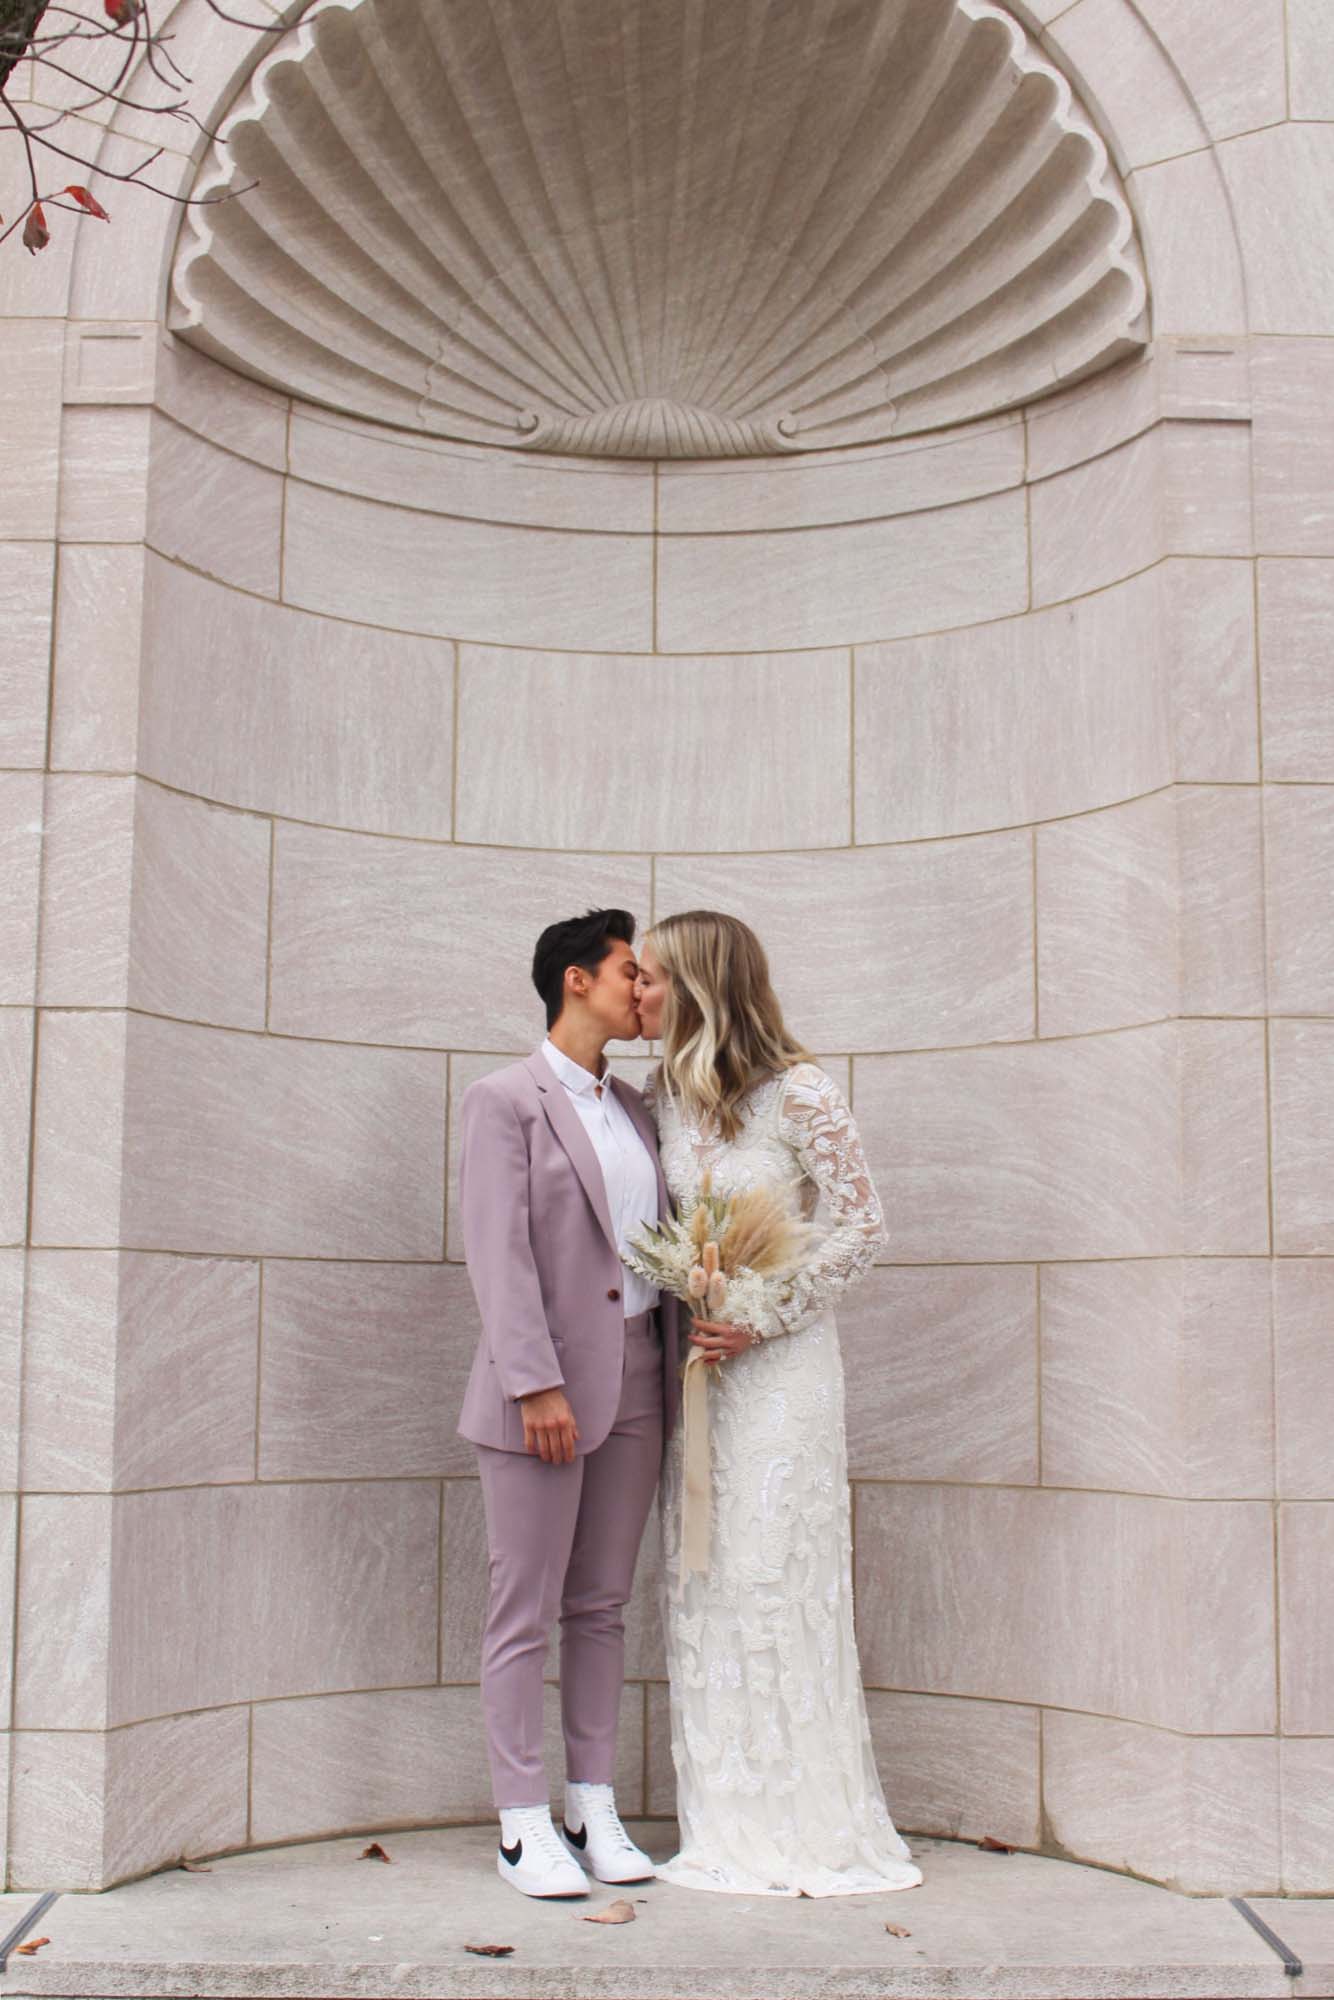 City hall elopement with delectable orange and white autumn cake | Featured on Equally Wed, the leading LGBTQ+ wedding magazine